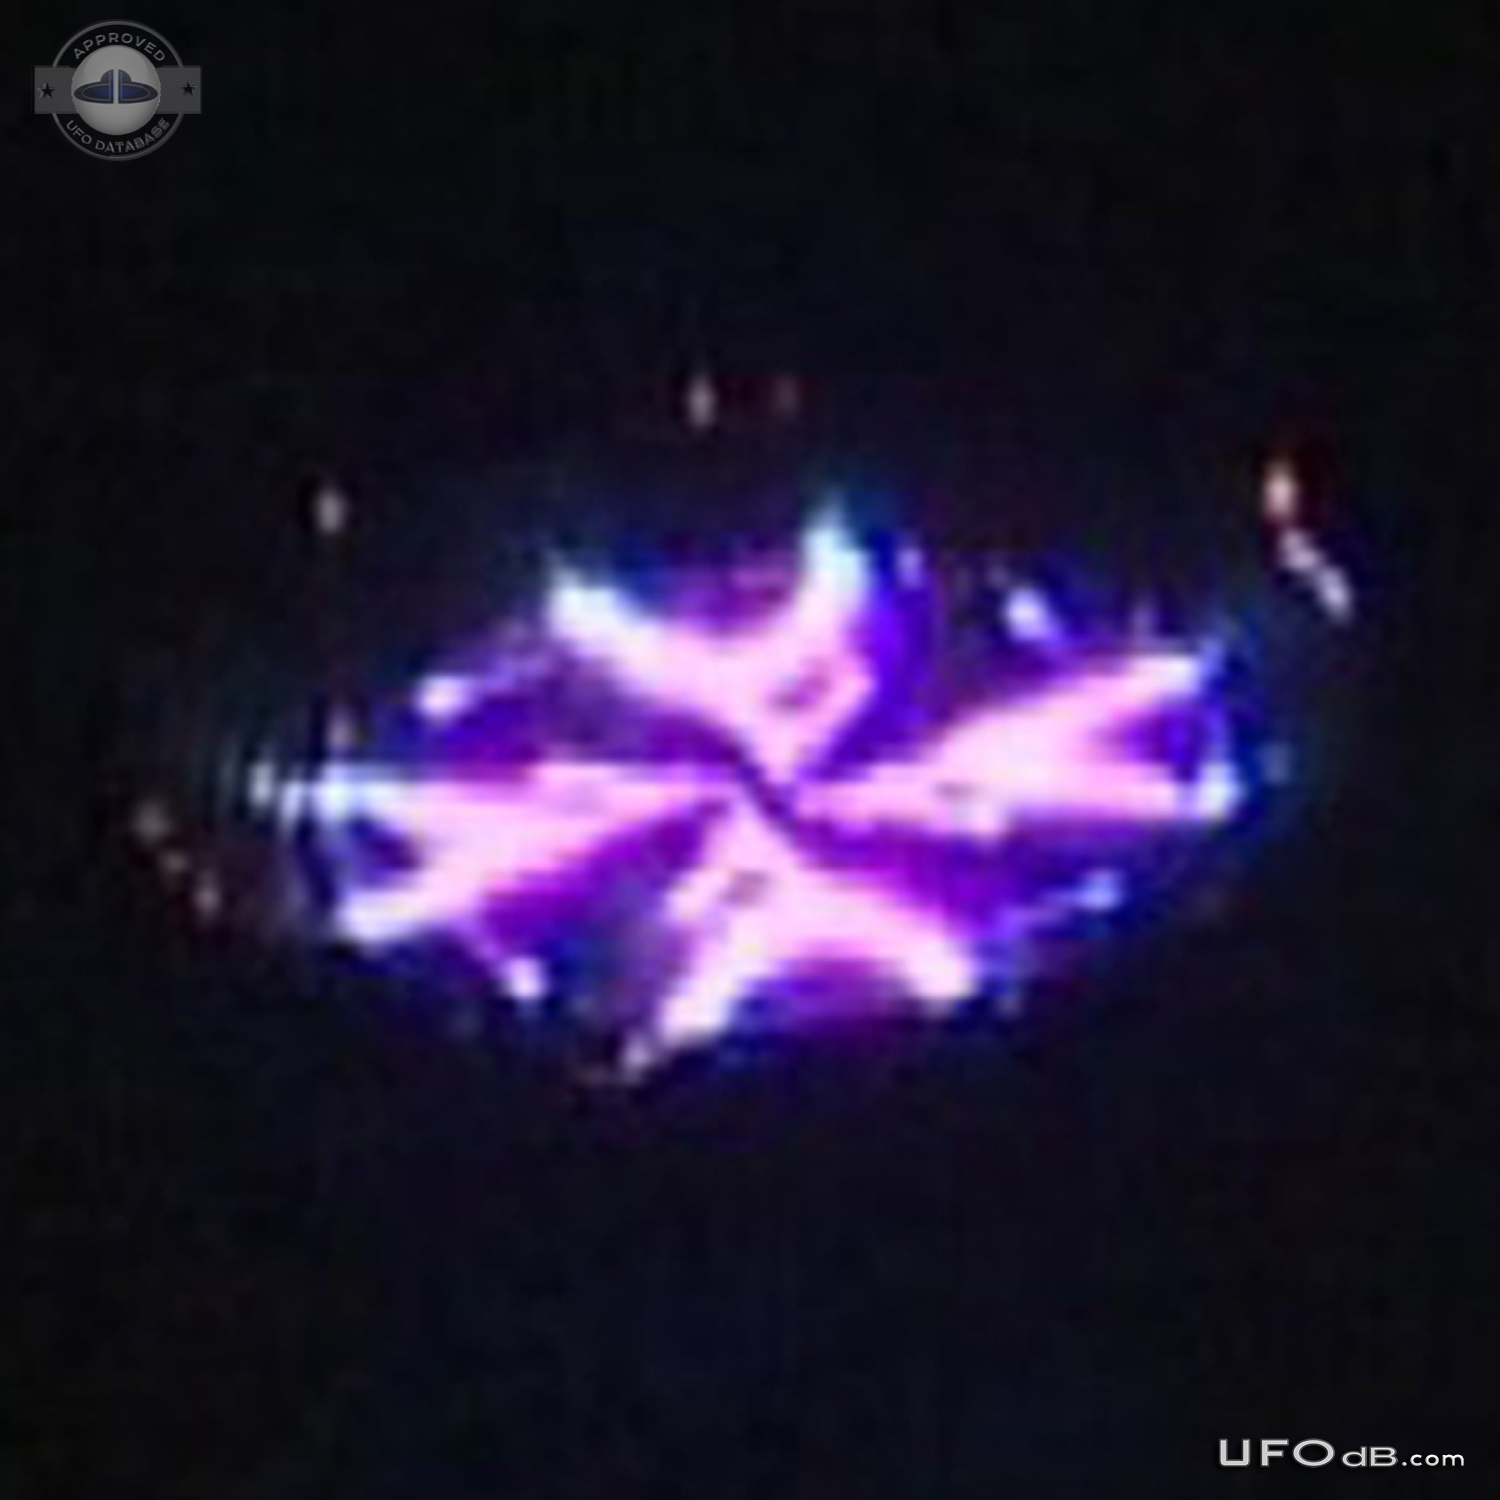 It was a big flying object UFO with purple or teal light - Los Banos UFO Picture #597-4